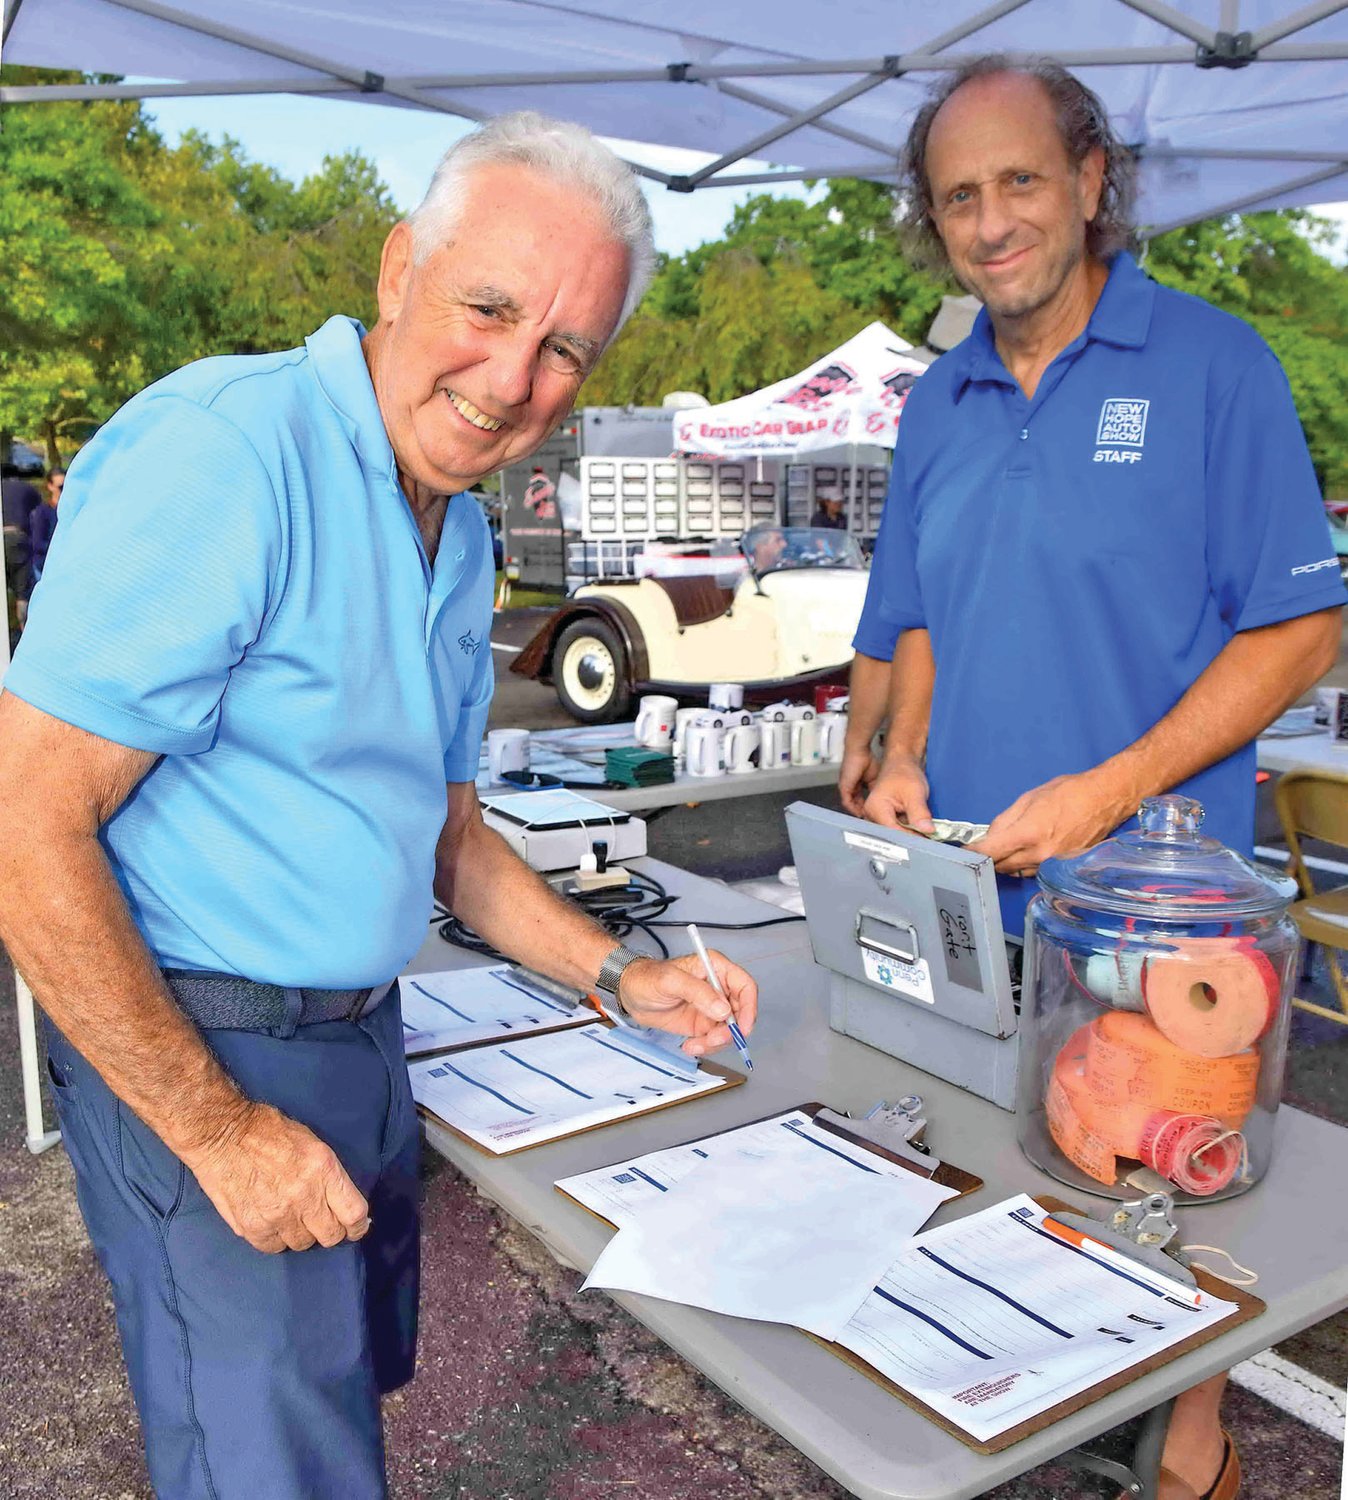 Roger Reidley registers his vehicle for the New Hope Automobile Show as staff member Steve Williams looks on.